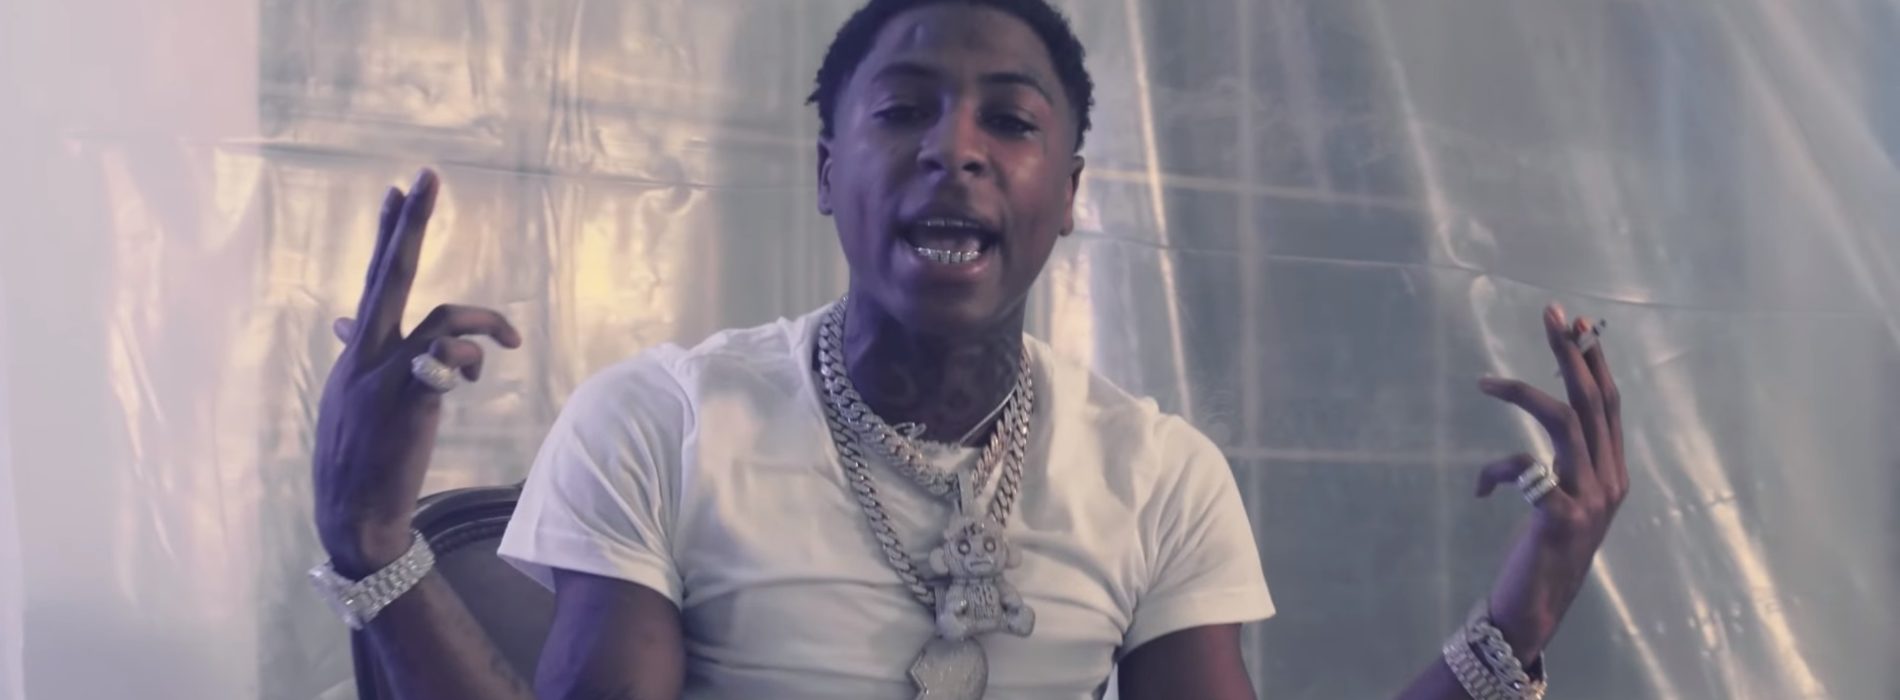 YoungBoy Never Broke Again – Self Control (Official Video) – Septembre 2019